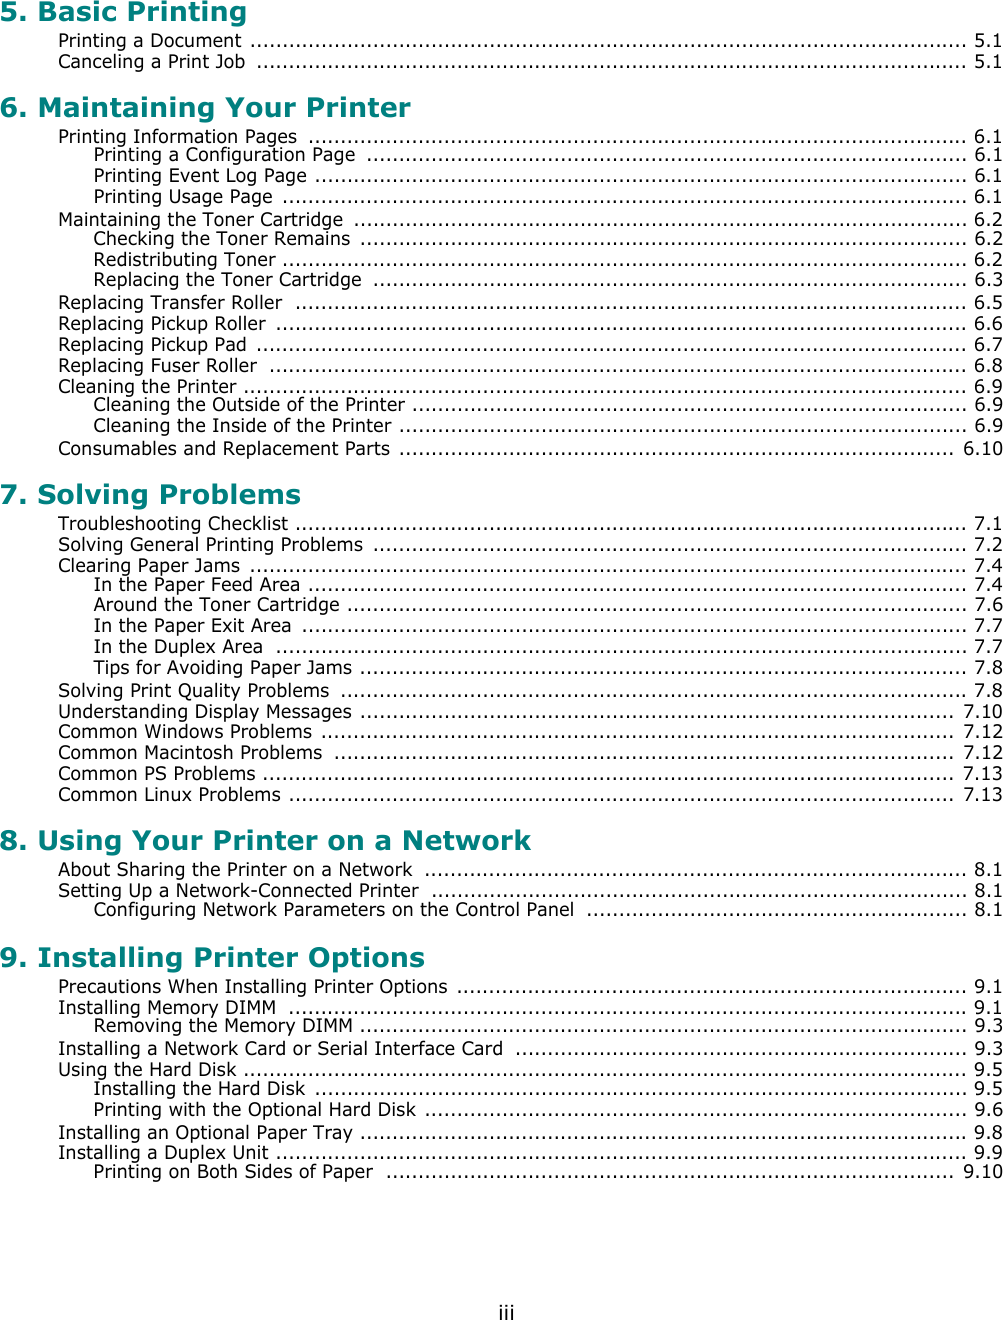 iii5. Basic PrintingPrinting a Document ............................................................................................................... 5.1Canceling a Print Job  .............................................................................................................. 5.16. Maintaining Your PrinterPrinting Information Pages  ...................................................................................................... 6.1Printing a Configuration Page  ............................................................................................. 6.1Printing Event Log Page ..................................................................................................... 6.1Printing Usage Page  .......................................................................................................... 6.1Maintaining the Toner Cartridge  ............................................................................................... 6.2Checking the Toner Remains  .............................................................................................. 6.2Redistributing Toner .......................................................................................................... 6.2Replacing the Toner Cartridge  ............................................................................................ 6.3Replacing Transfer Roller  ........................................................................................................ 6.5Replacing Pickup Roller  ........................................................................................................... 6.6Replacing Pickup Pad .............................................................................................................. 6.7Replacing Fuser Roller  ............................................................................................................ 6.8Cleaning the Printer ................................................................................................................ 6.9Cleaning the Outside of the Printer ...................................................................................... 6.9Cleaning the Inside of the Printer ........................................................................................ 6.9Consumables and Replacement Parts  ...................................................................................... 6.107. Solving ProblemsTroubleshooting Checklist ........................................................................................................ 7.1Solving General Printing Problems  ............................................................................................ 7.2Clearing Paper Jams  ............................................................................................................... 7.4In the Paper Feed Area ...................................................................................................... 7.4Around the Toner Cartridge ................................................................................................ 7.6In the Paper Exit Area  ....................................................................................................... 7.7In the Duplex Area  ........................................................................................................... 7.7Tips for Avoiding Paper Jams .............................................................................................. 7.8Solving Print Quality Problems  ................................................................................................. 7.8Understanding Display Messages ............................................................................................ 7.10Common Windows Problems .................................................................................................. 7.12Common Macintosh Problems  ................................................................................................ 7.12Common PS Problems ...........................................................................................................  7.13Common Linux Problems ....................................................................................................... 7.138. Using Your Printer on a NetworkAbout Sharing the Printer on a Network  .................................................................................... 8.1Setting Up a Network-Connected Printer  ................................................................................... 8.1Configuring Network Parameters on the Control Panel  ........................................................... 8.19. Installing Printer OptionsPrecautions When Installing Printer Options  ............................................................................... 9.1Installing Memory DIMM  ......................................................................................................... 9.1Removing the Memory DIMM .............................................................................................. 9.3Installing a Network Card or Serial Interface Card  ...................................................................... 9.3Using the Hard Disk ................................................................................................................ 9.5Installing the Hard Disk  ..................................................................................................... 9.5Printing with the Optional Hard Disk .................................................................................... 9.6Installing an Optional Paper Tray .............................................................................................. 9.8Installing a Duplex Unit ........................................................................................................... 9.9Printing on Both Sides of Paper  ........................................................................................ 9.10